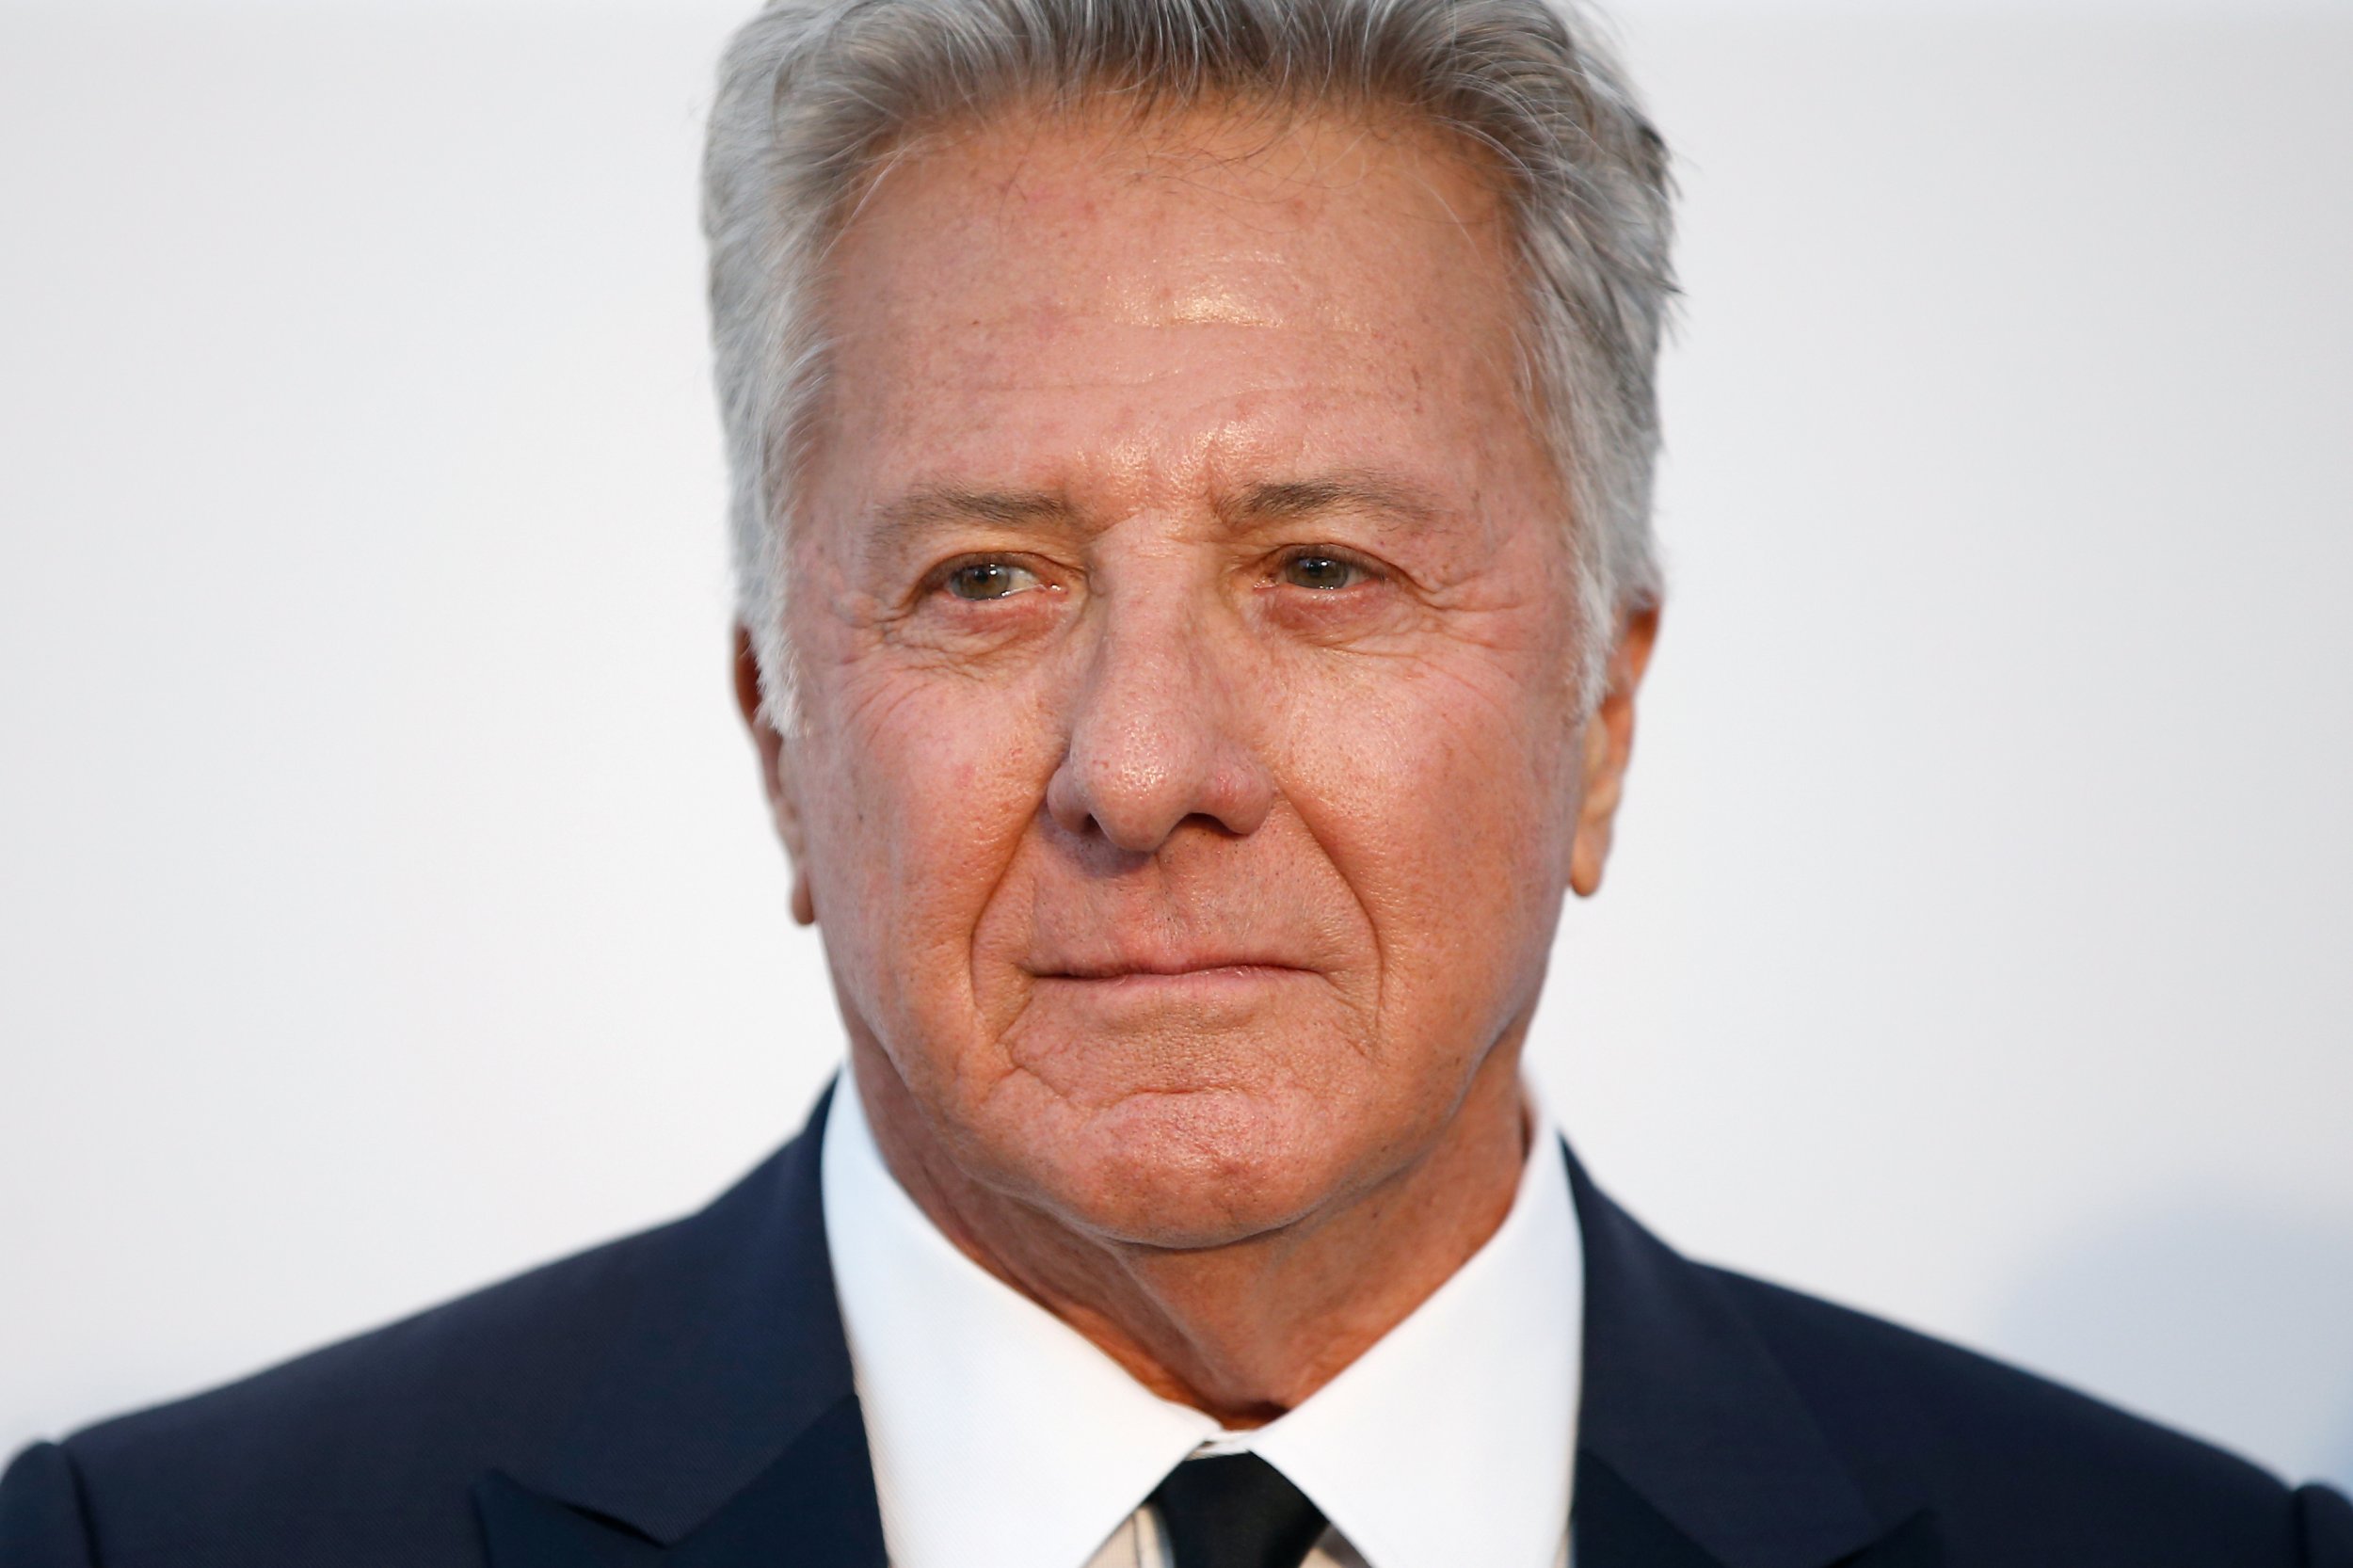 Dustin Hoffman called a "creeper" by John Oliver